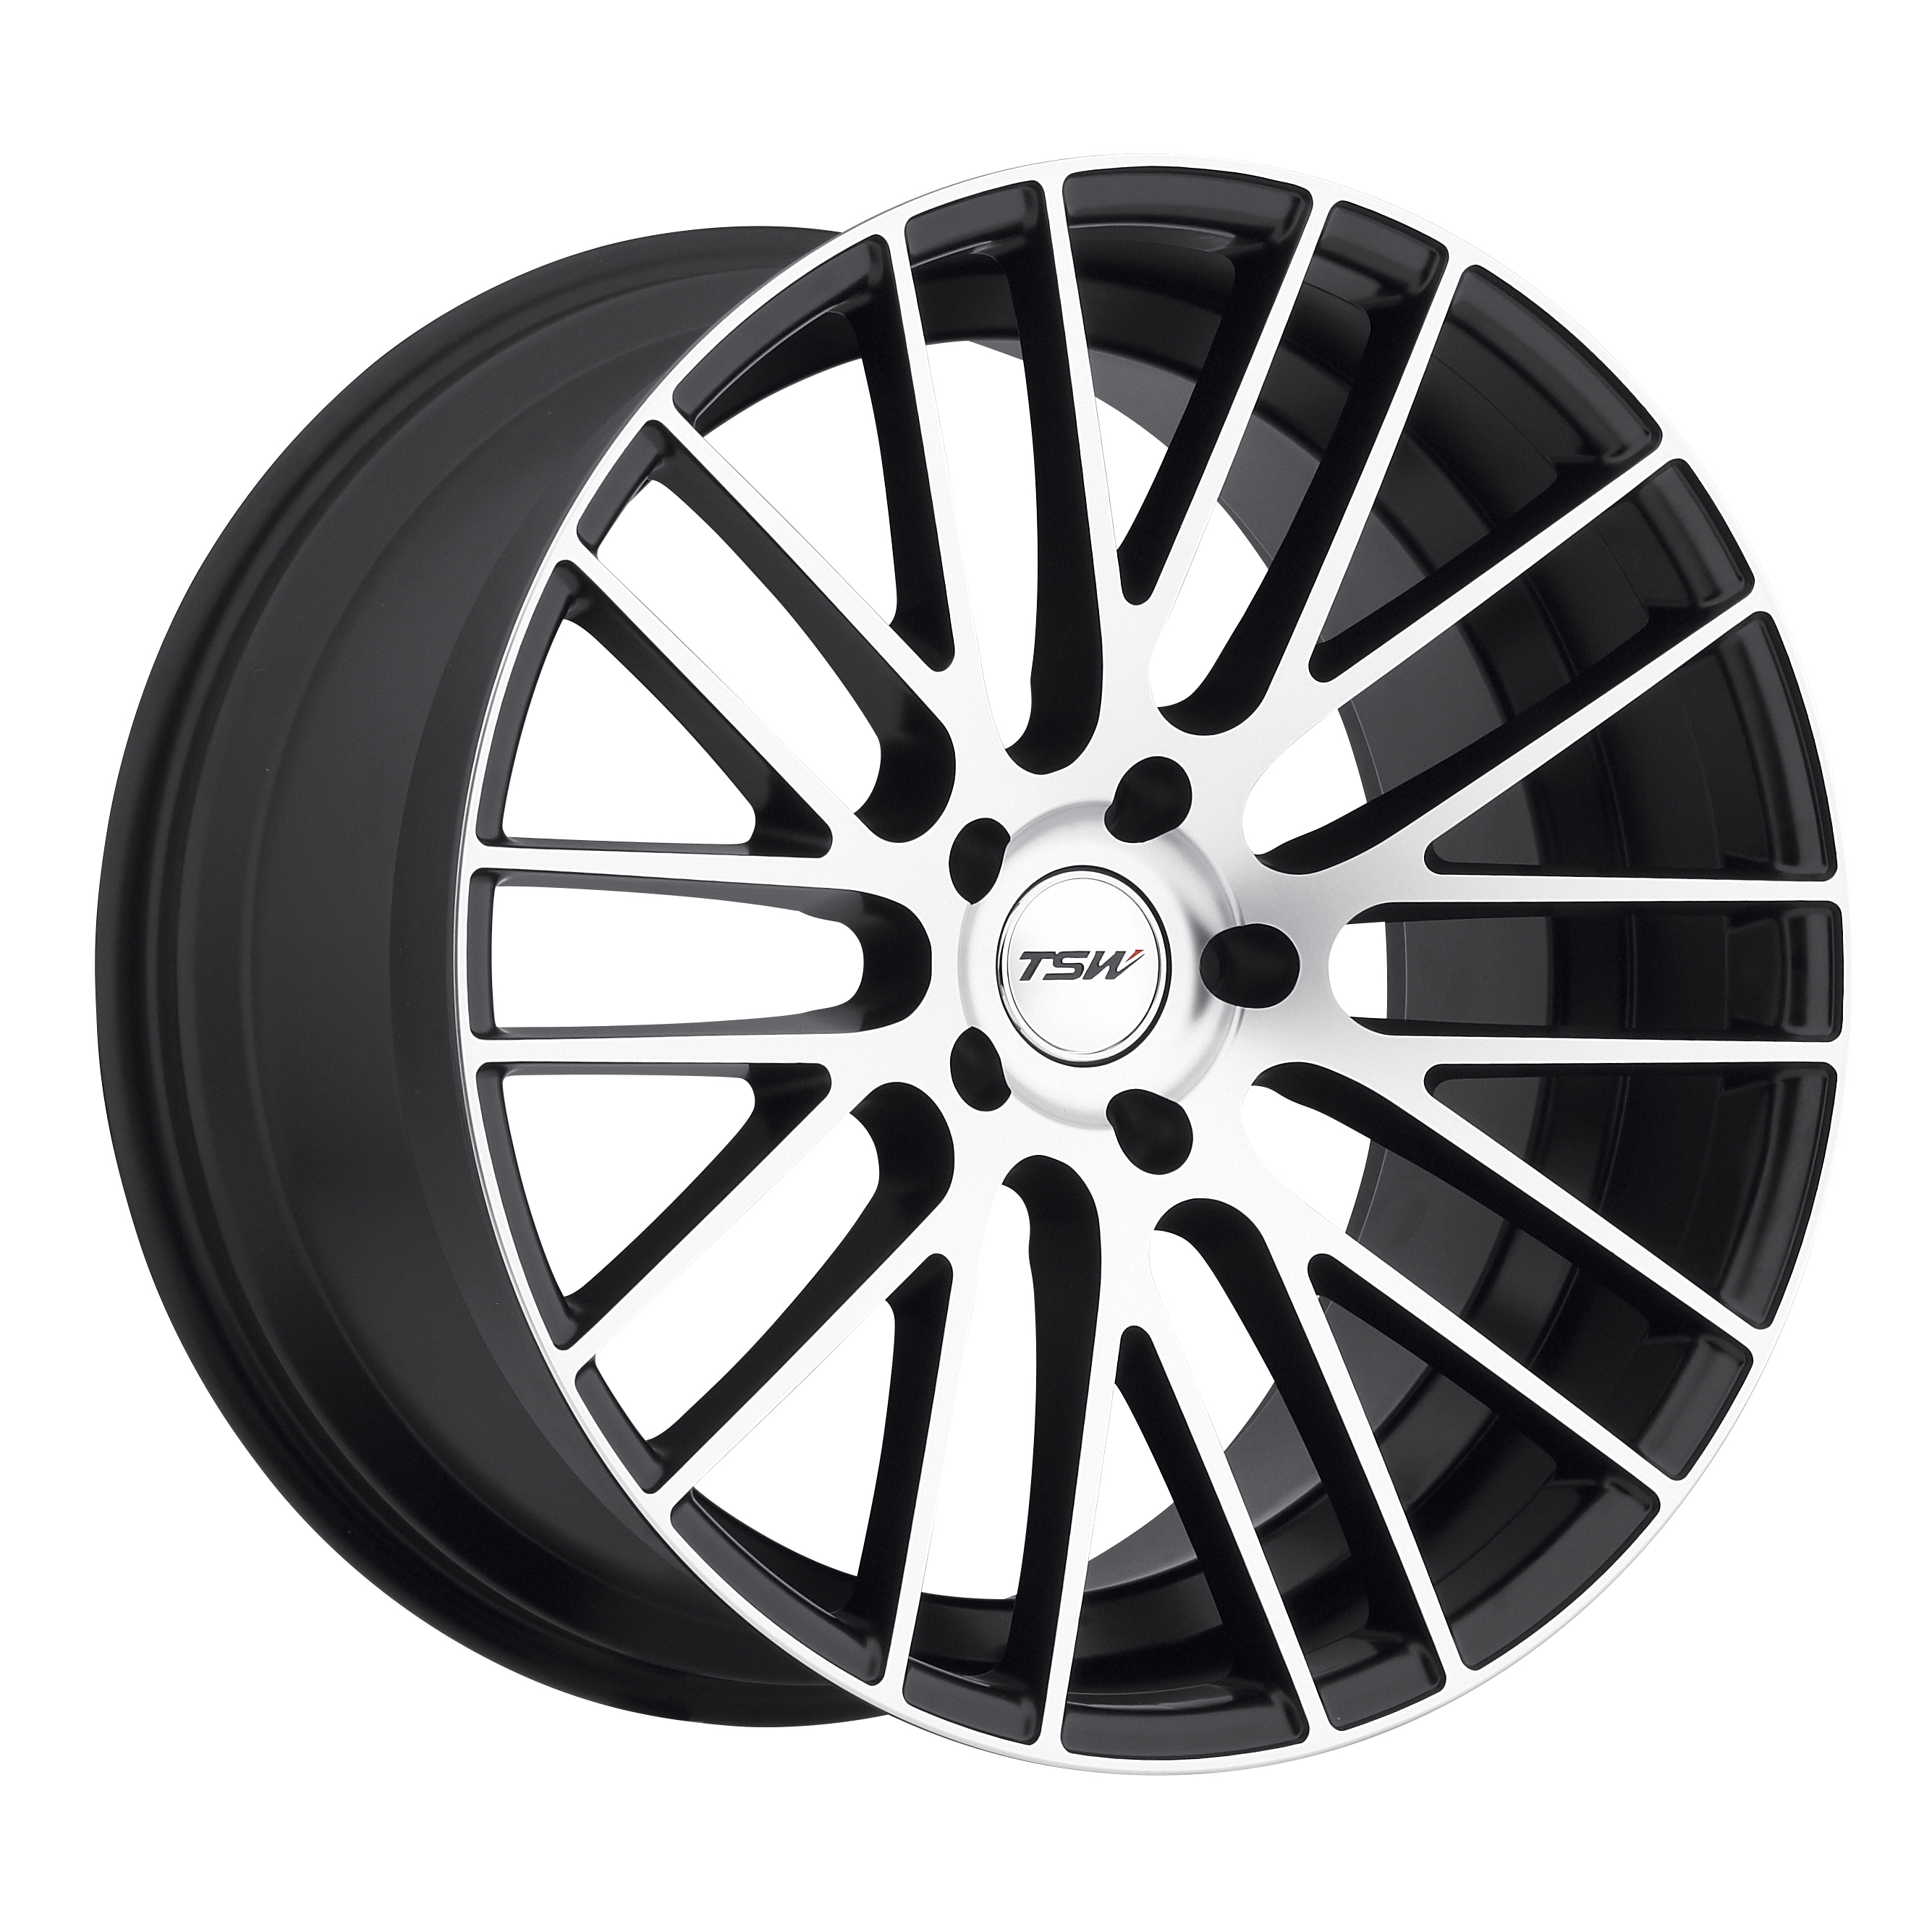 Alloy Wheels by TSW - the Parabolica in Matte Black with Matte Machine Face